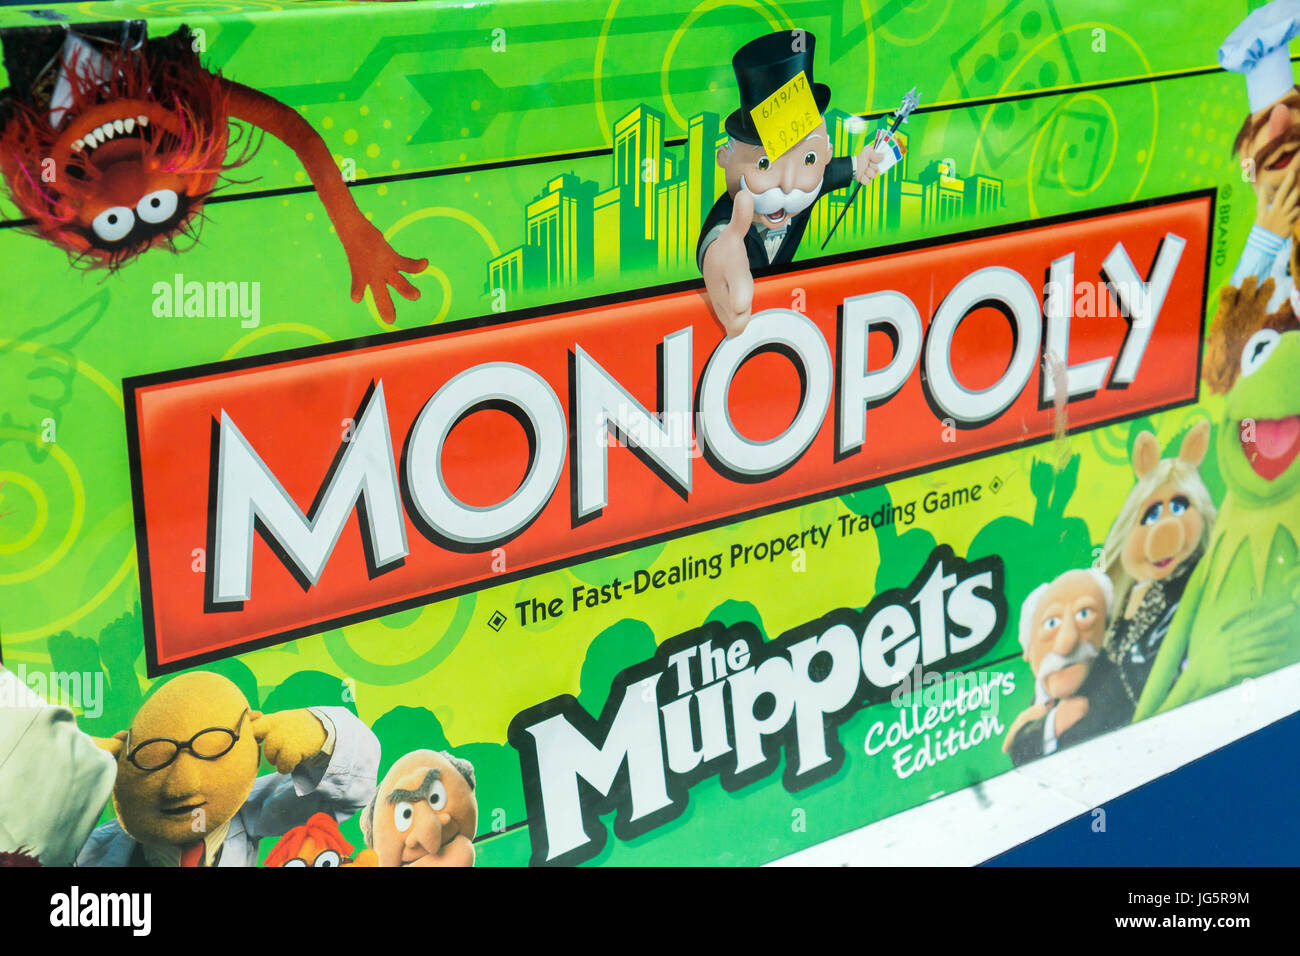 Thematic 'Muppets' version of the famous Monopoly board game seen in a second-hand store in New York on Wednesday, June 28, 2017. The depression-era game was first sold commercially in 1935 by Parker Brothers and is now owned by Hasbro which acquired parker Brothers in 1991. (© Richard B. Levine) Stock Photo